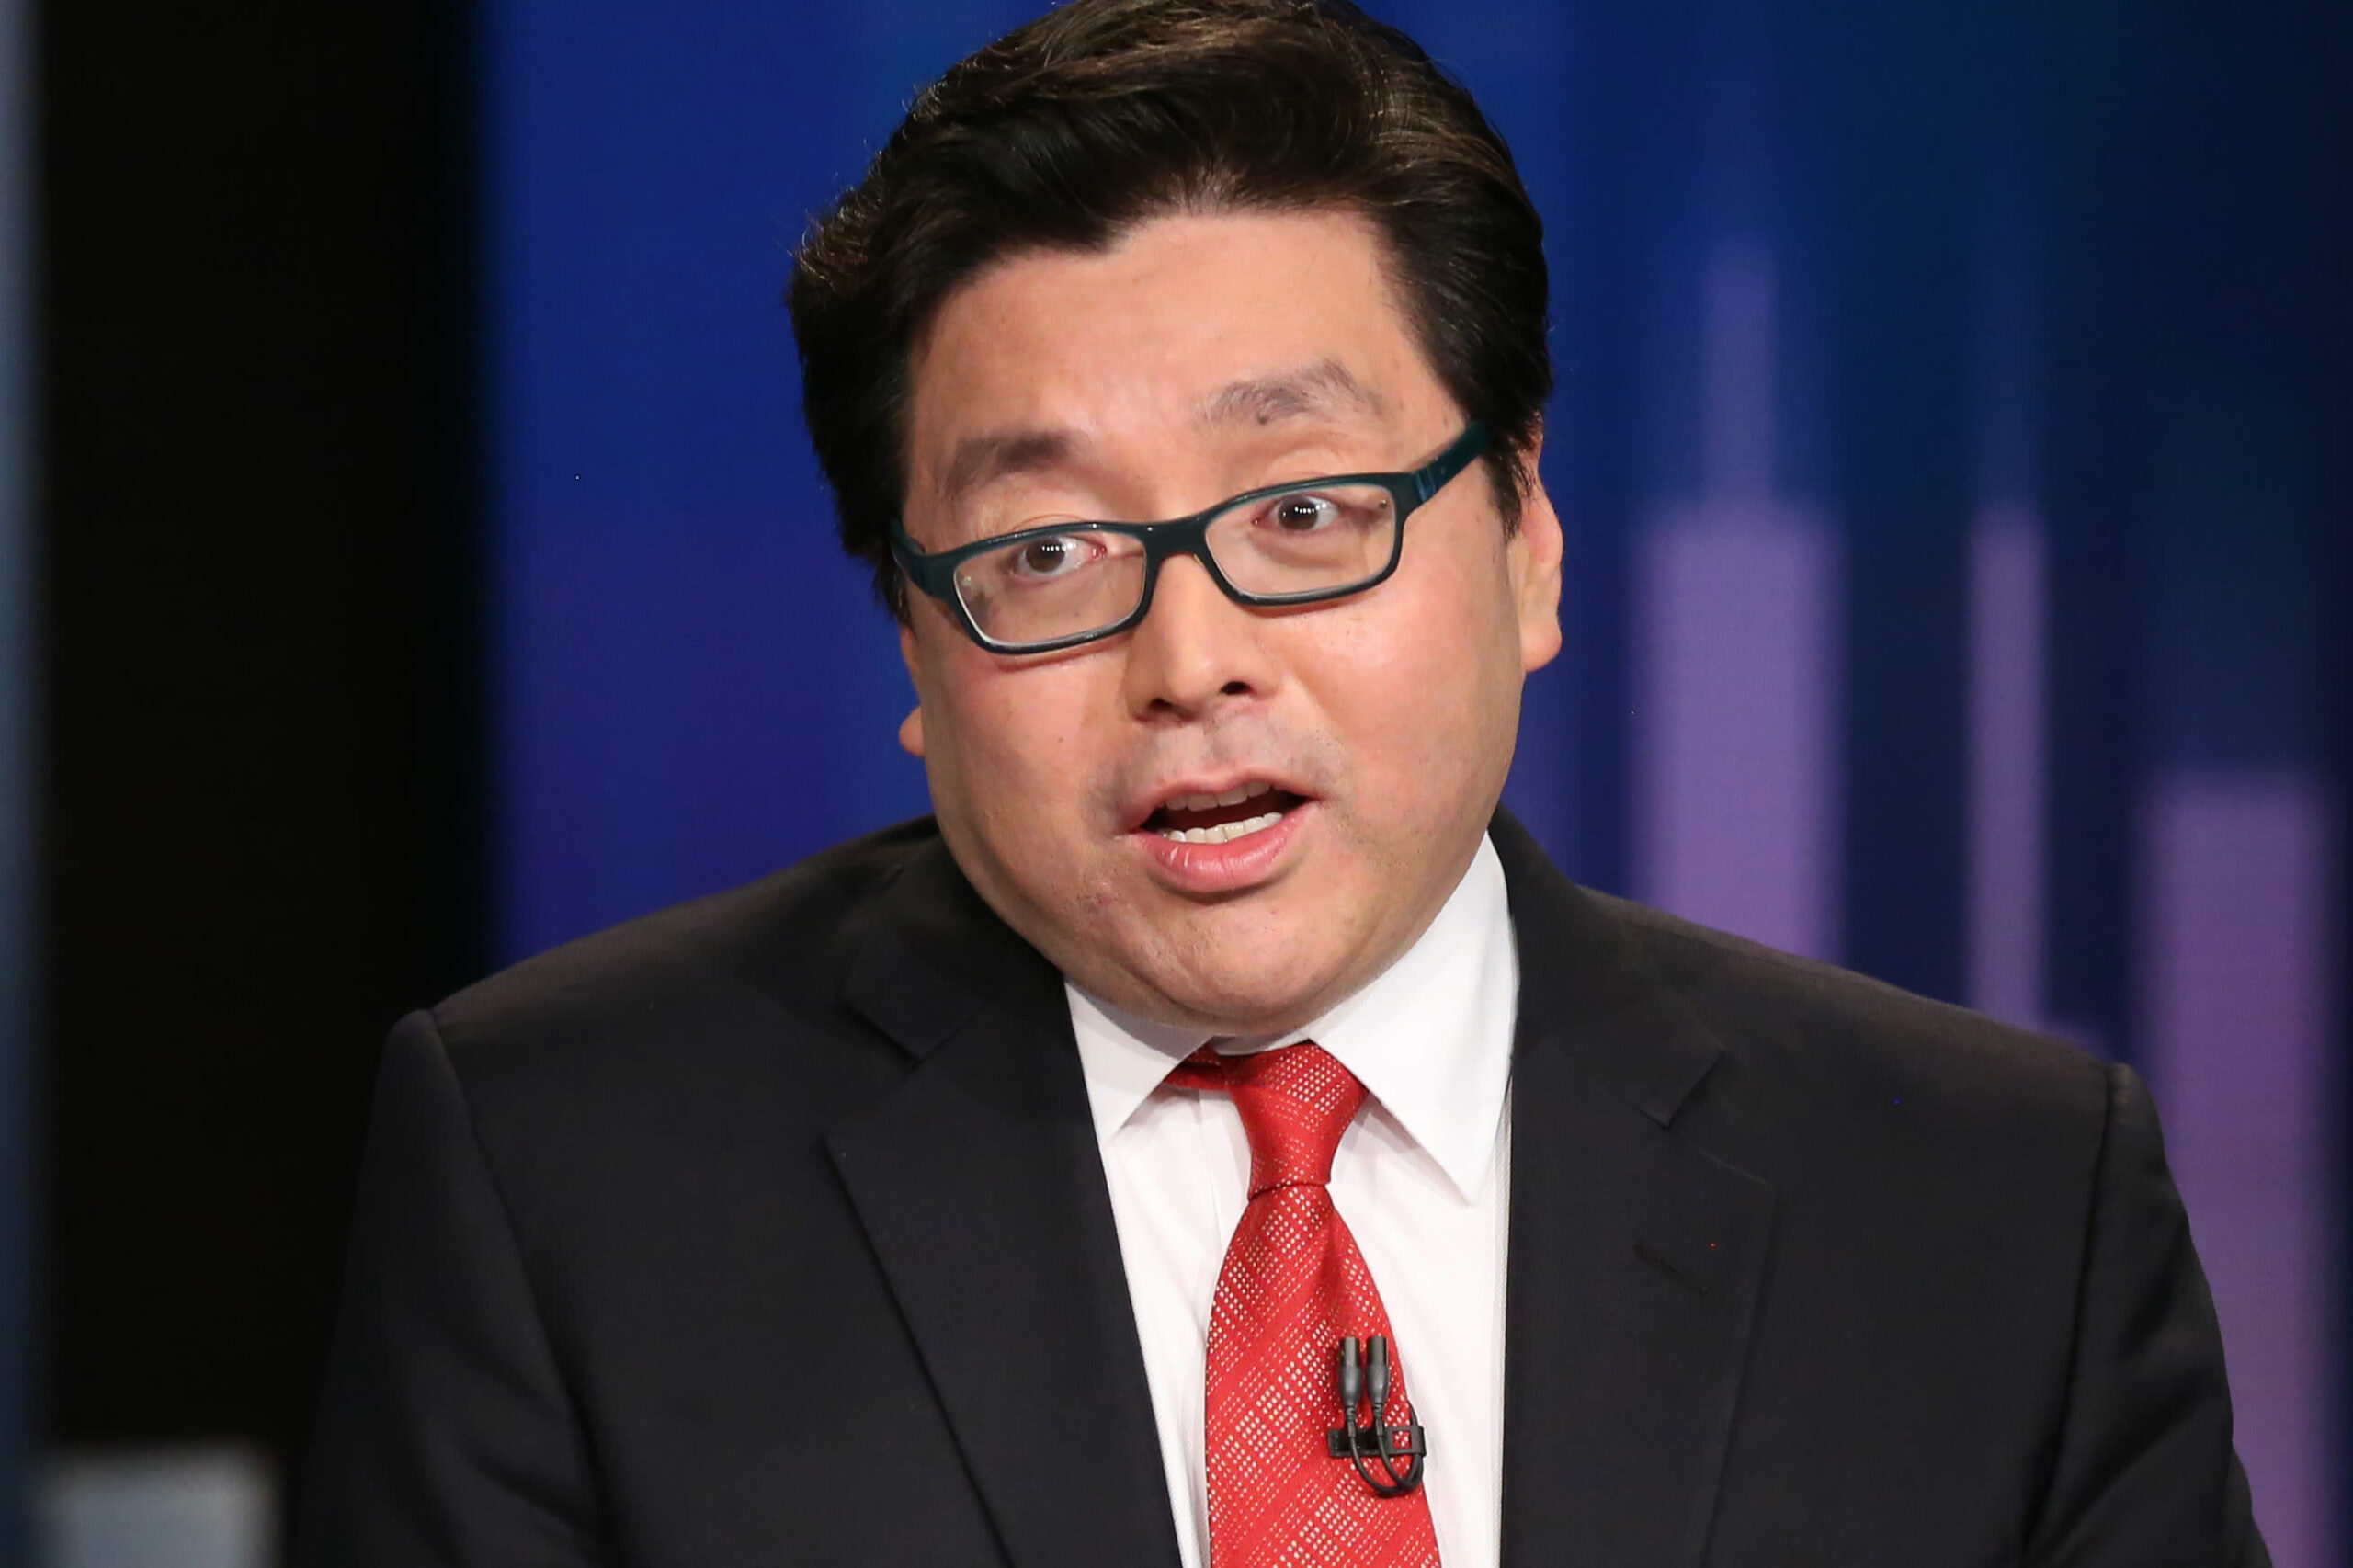 Fundstrat’s Tom Lee expects a ‘face-ripper rally’ in April